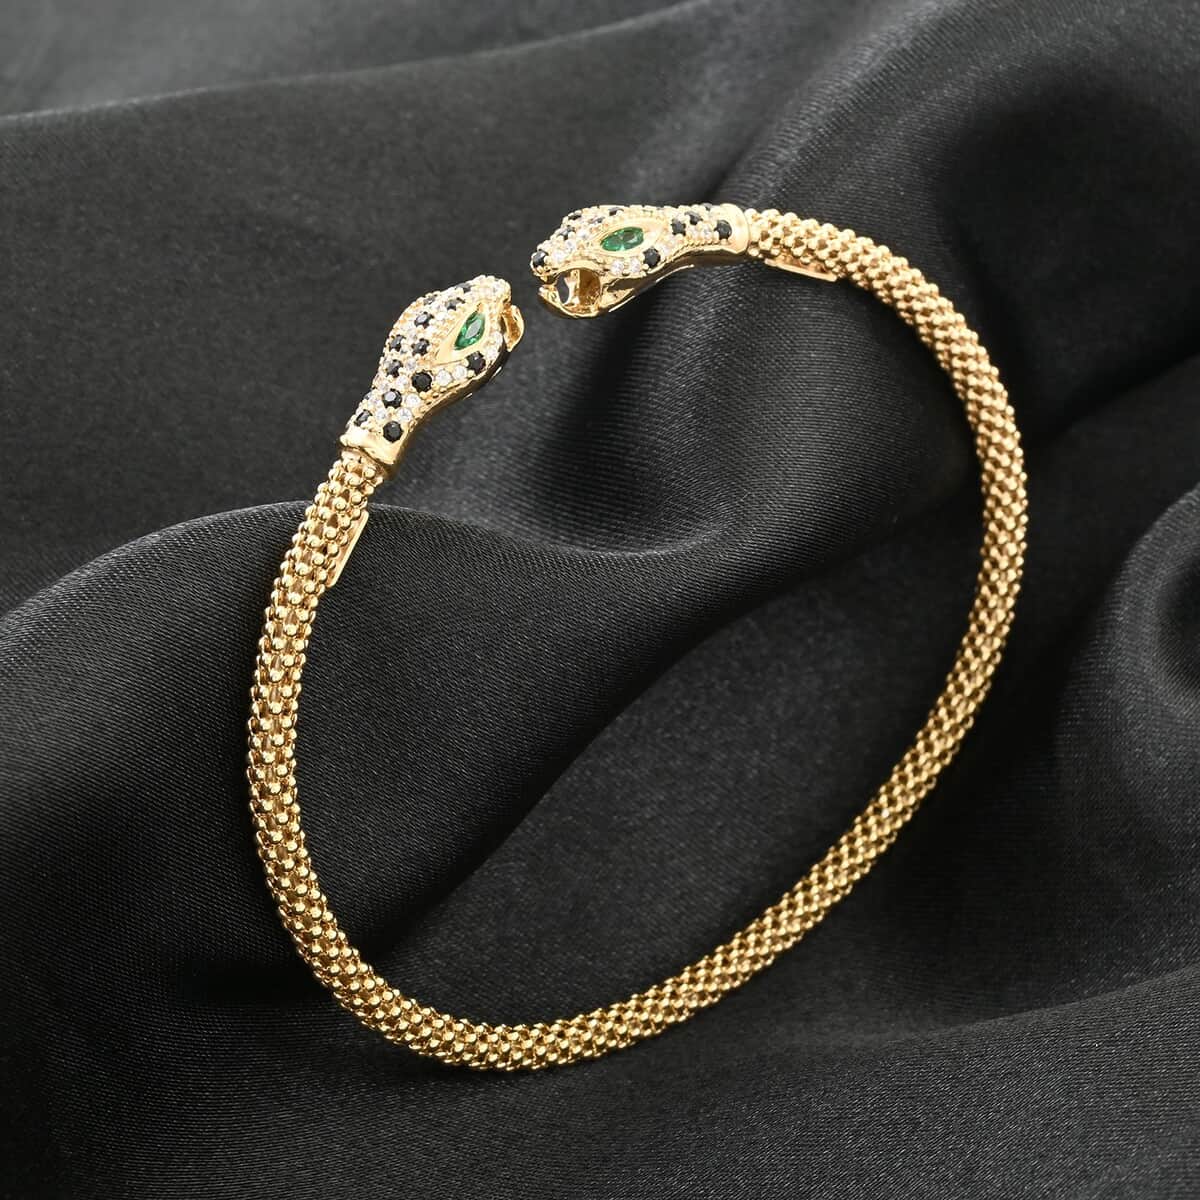 Italian Simulated Green, White and Black Diamond Bangle Bracelet in 14K Yellow Gold Over Sterling Silver (6.25 In) 2.40 ctw image number 1